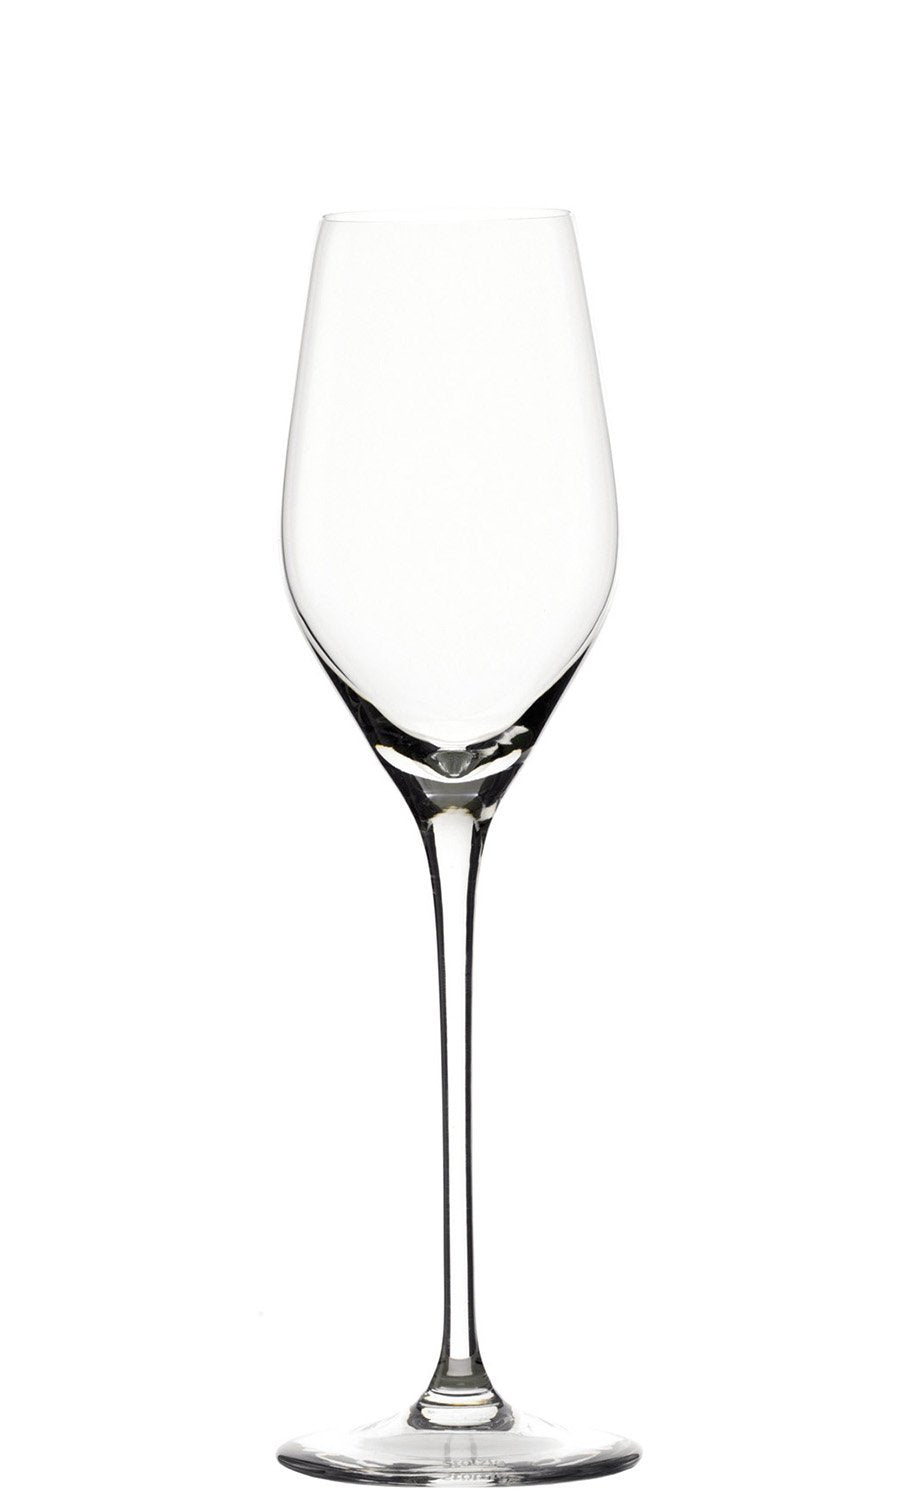 Stoelzle Exquisit Royal Champagne Sparkling Glass Lead Free Crystal